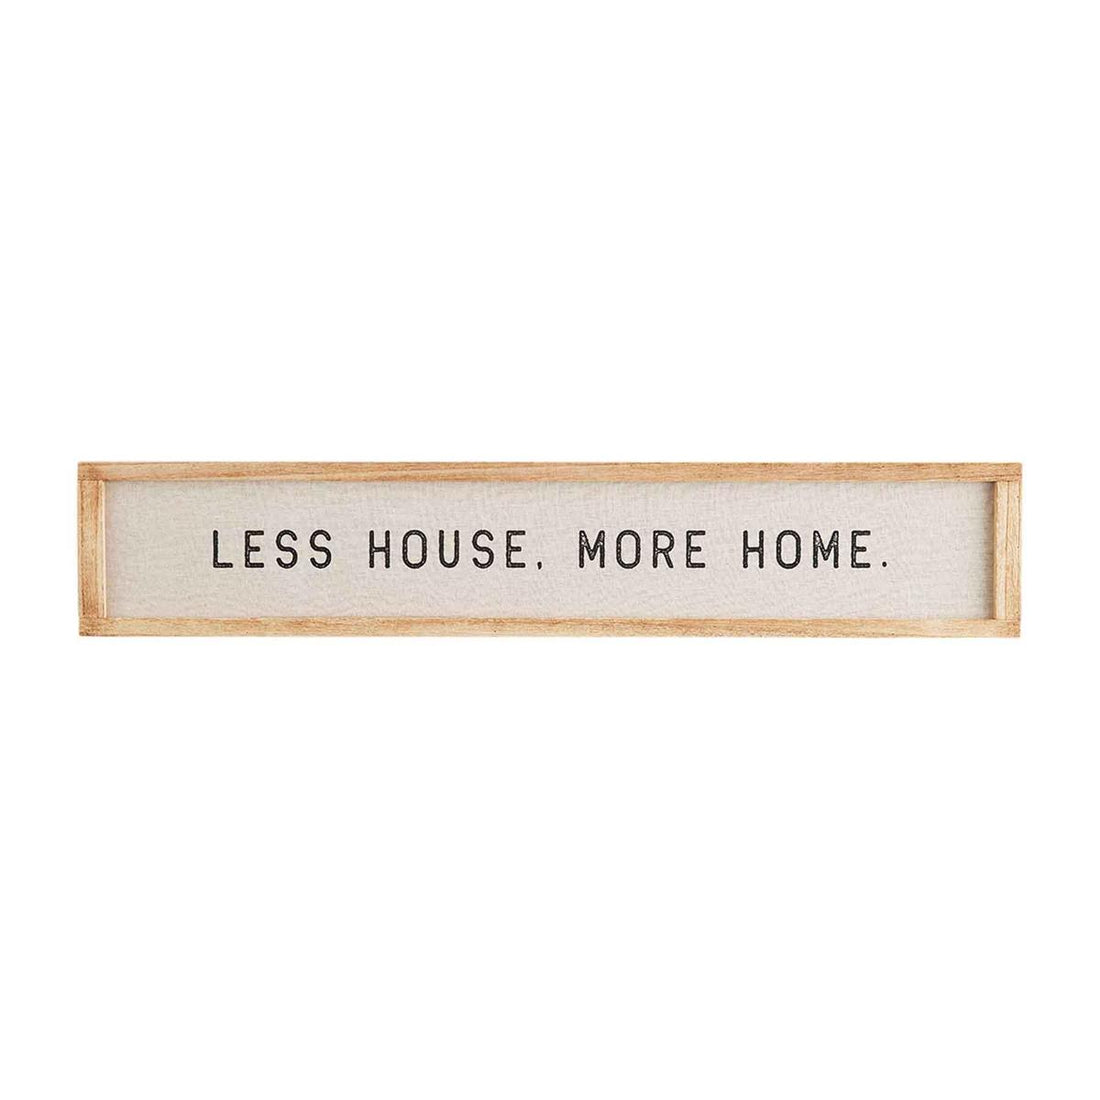 Less House. More Home